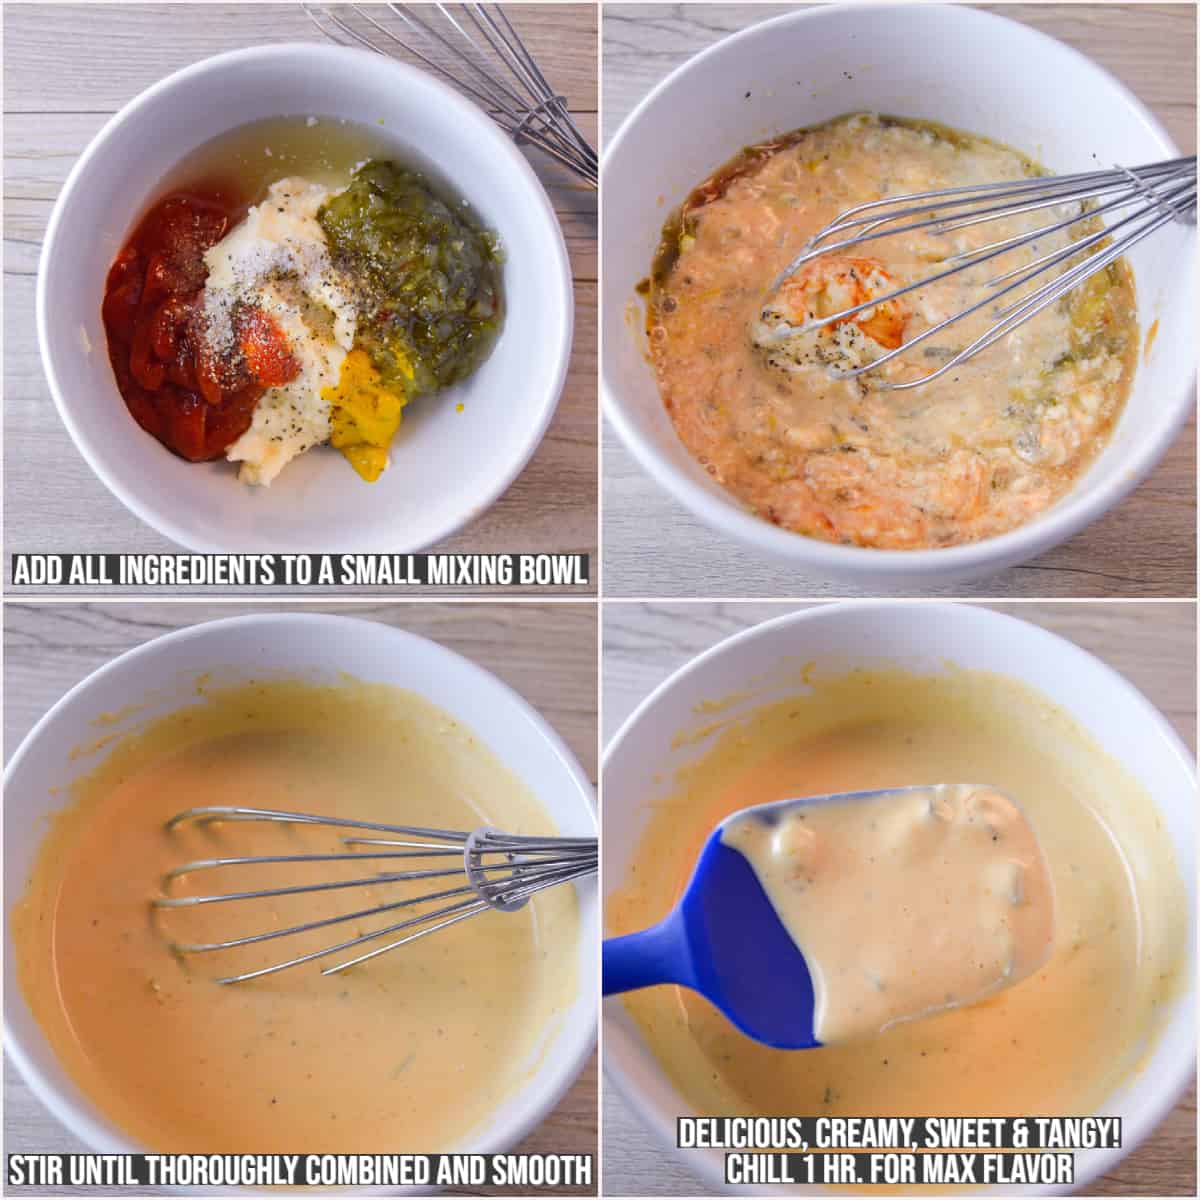 4 photos showing the steps in making homemade burger sauce/spread: upper left unmixed with all ingredients, upper rt starting to mix, lower left fully mixed and smooth, lower right fully mixed and showing texture on a blue spatula spoon